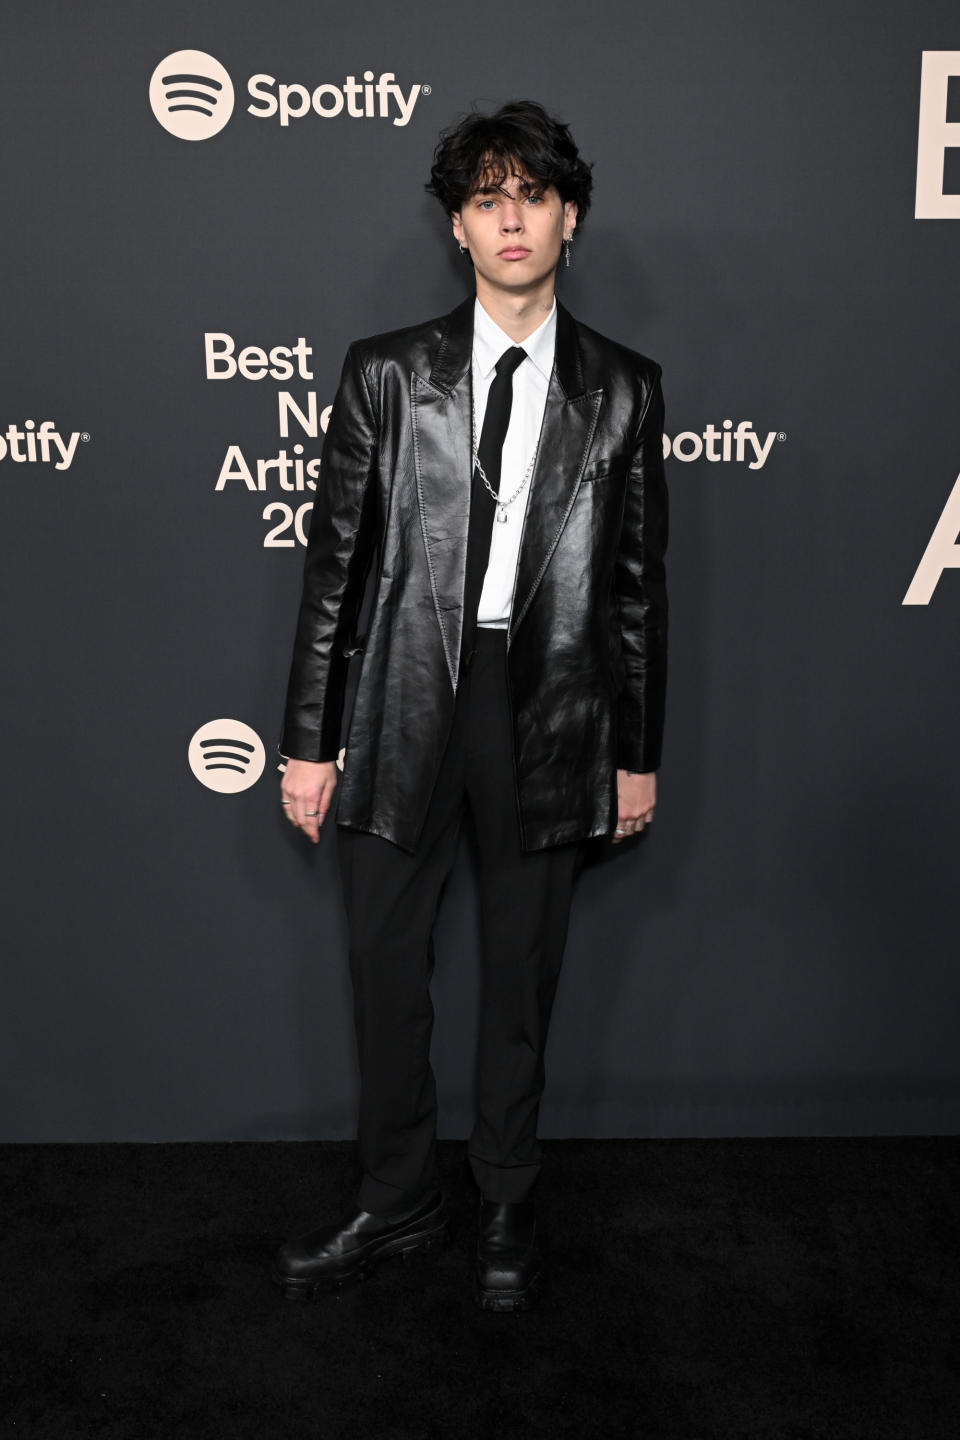 Landon Barker at the Spotify Best New Artist Party held at Paramount Studios on February 1, 2024 in Los Angeles, California.